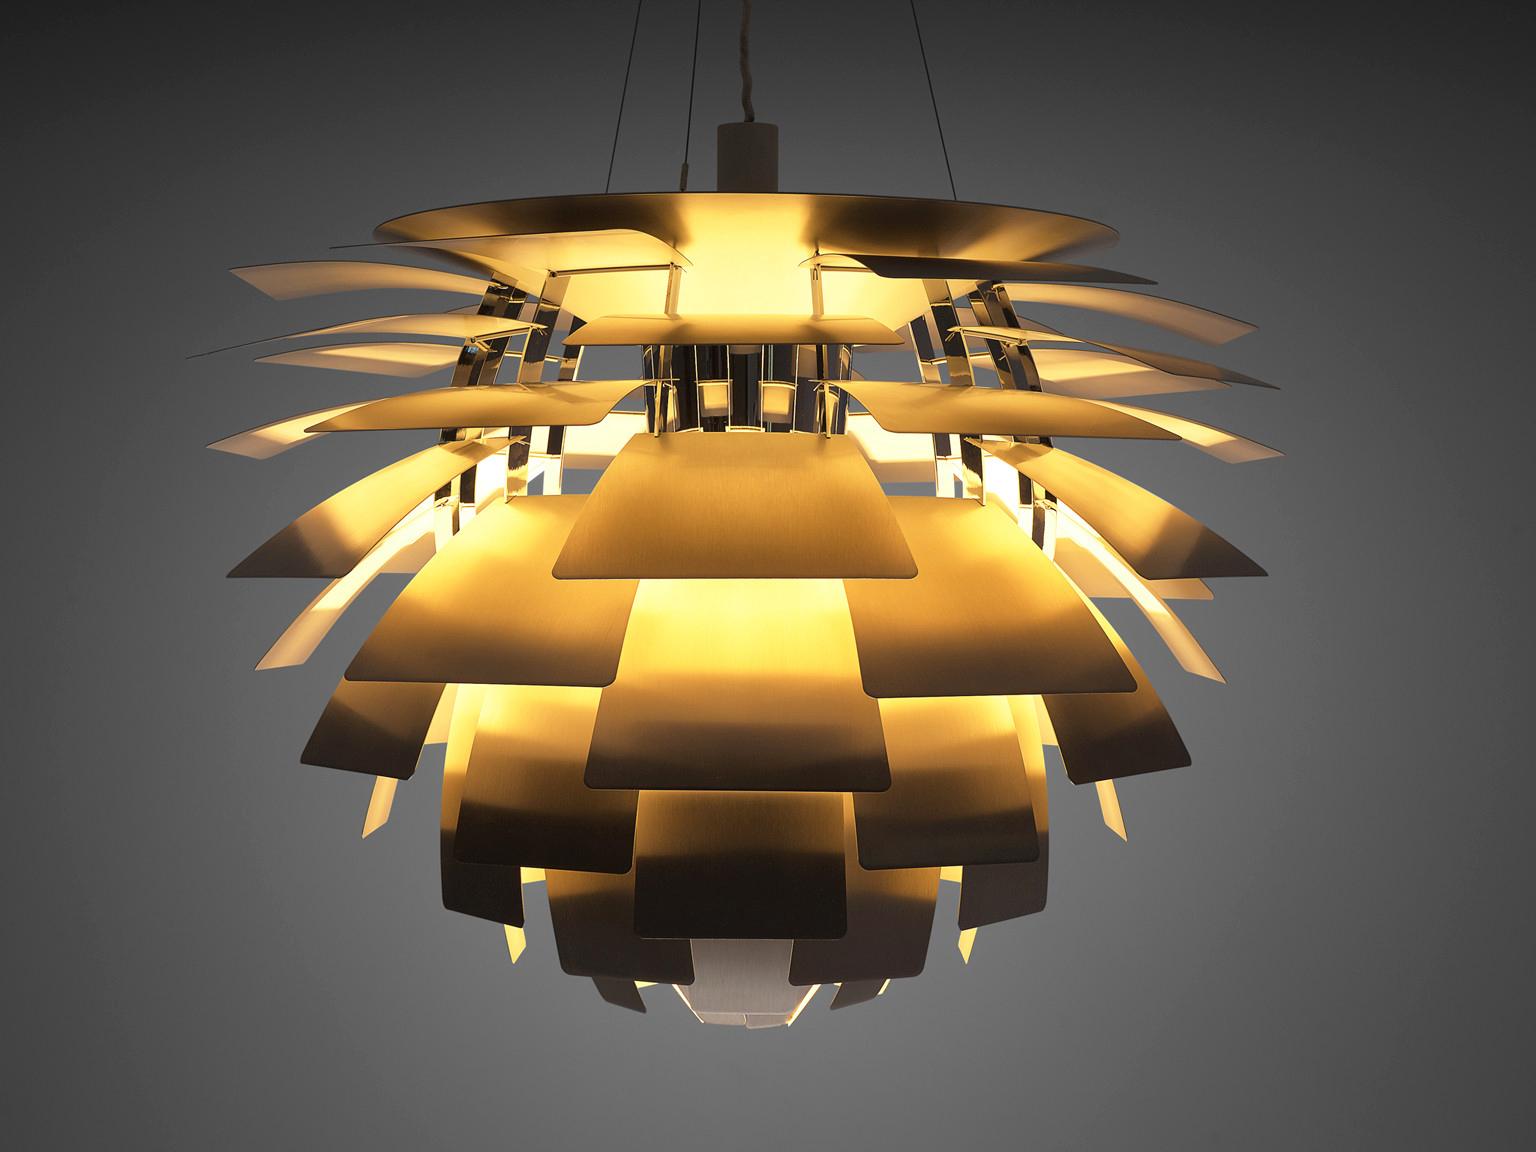 Poul Henningsen for Louis Poulsen, 'PH-Artichoke' pendant, stainless steel Denmark, design 1957, production 1970s.

The Artichoke pendant is an all time eyecatcher in the lighting design. This iconic pendant, designed by Poul Henningsen, has brushed